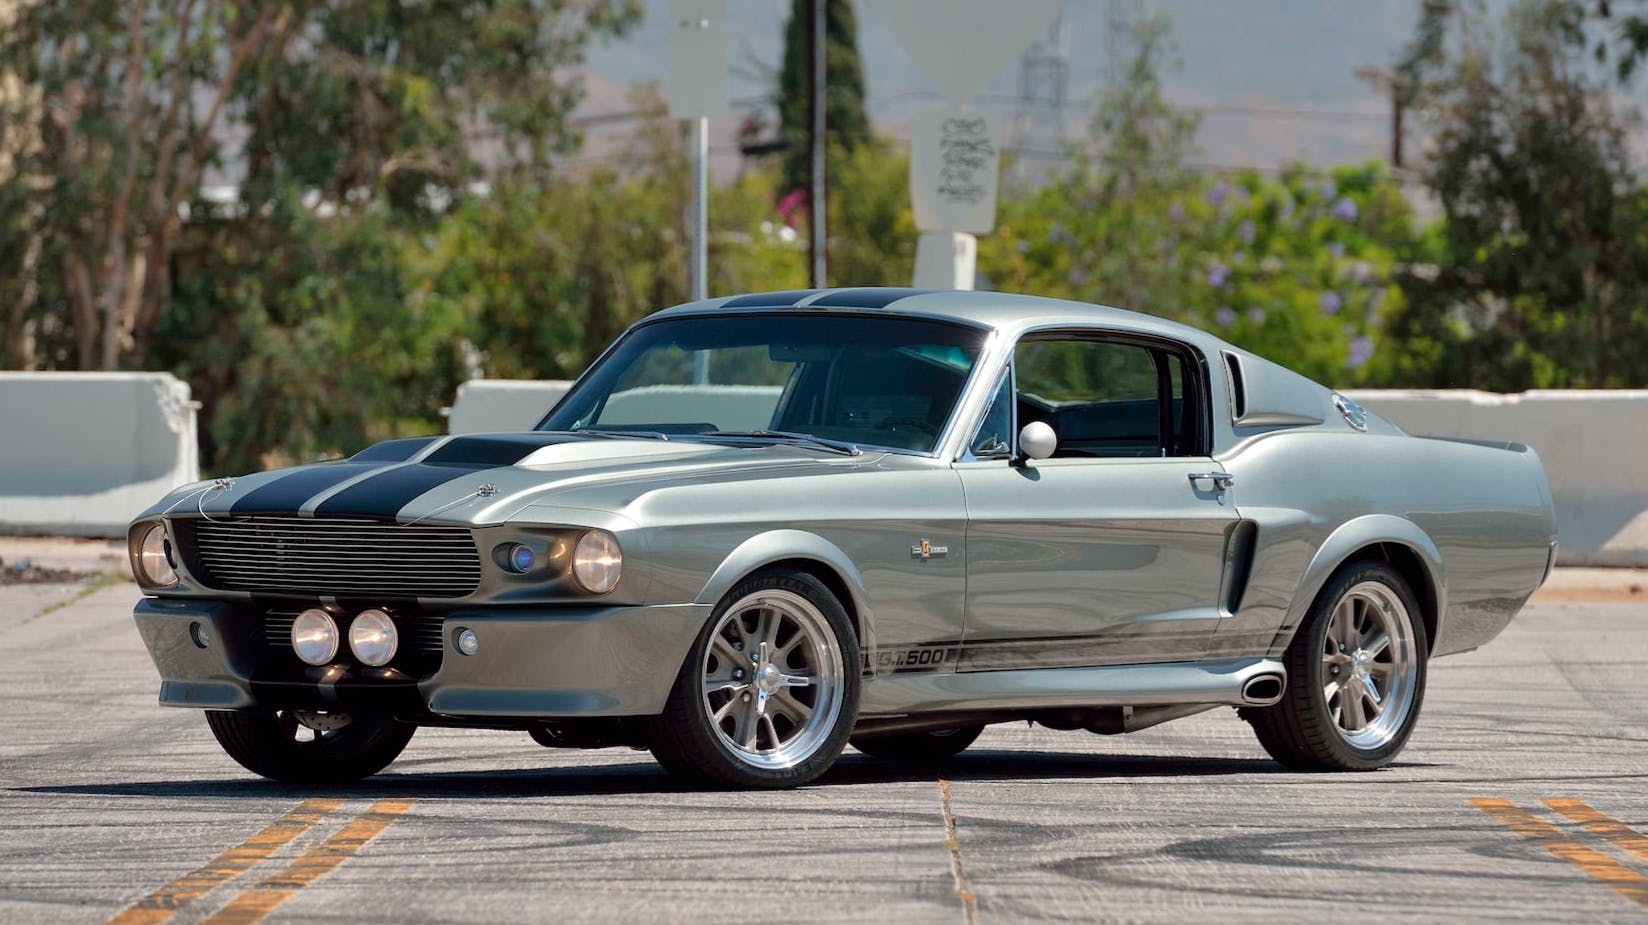 Ford Mustang Eleanor Gone in 60 Seconds movie